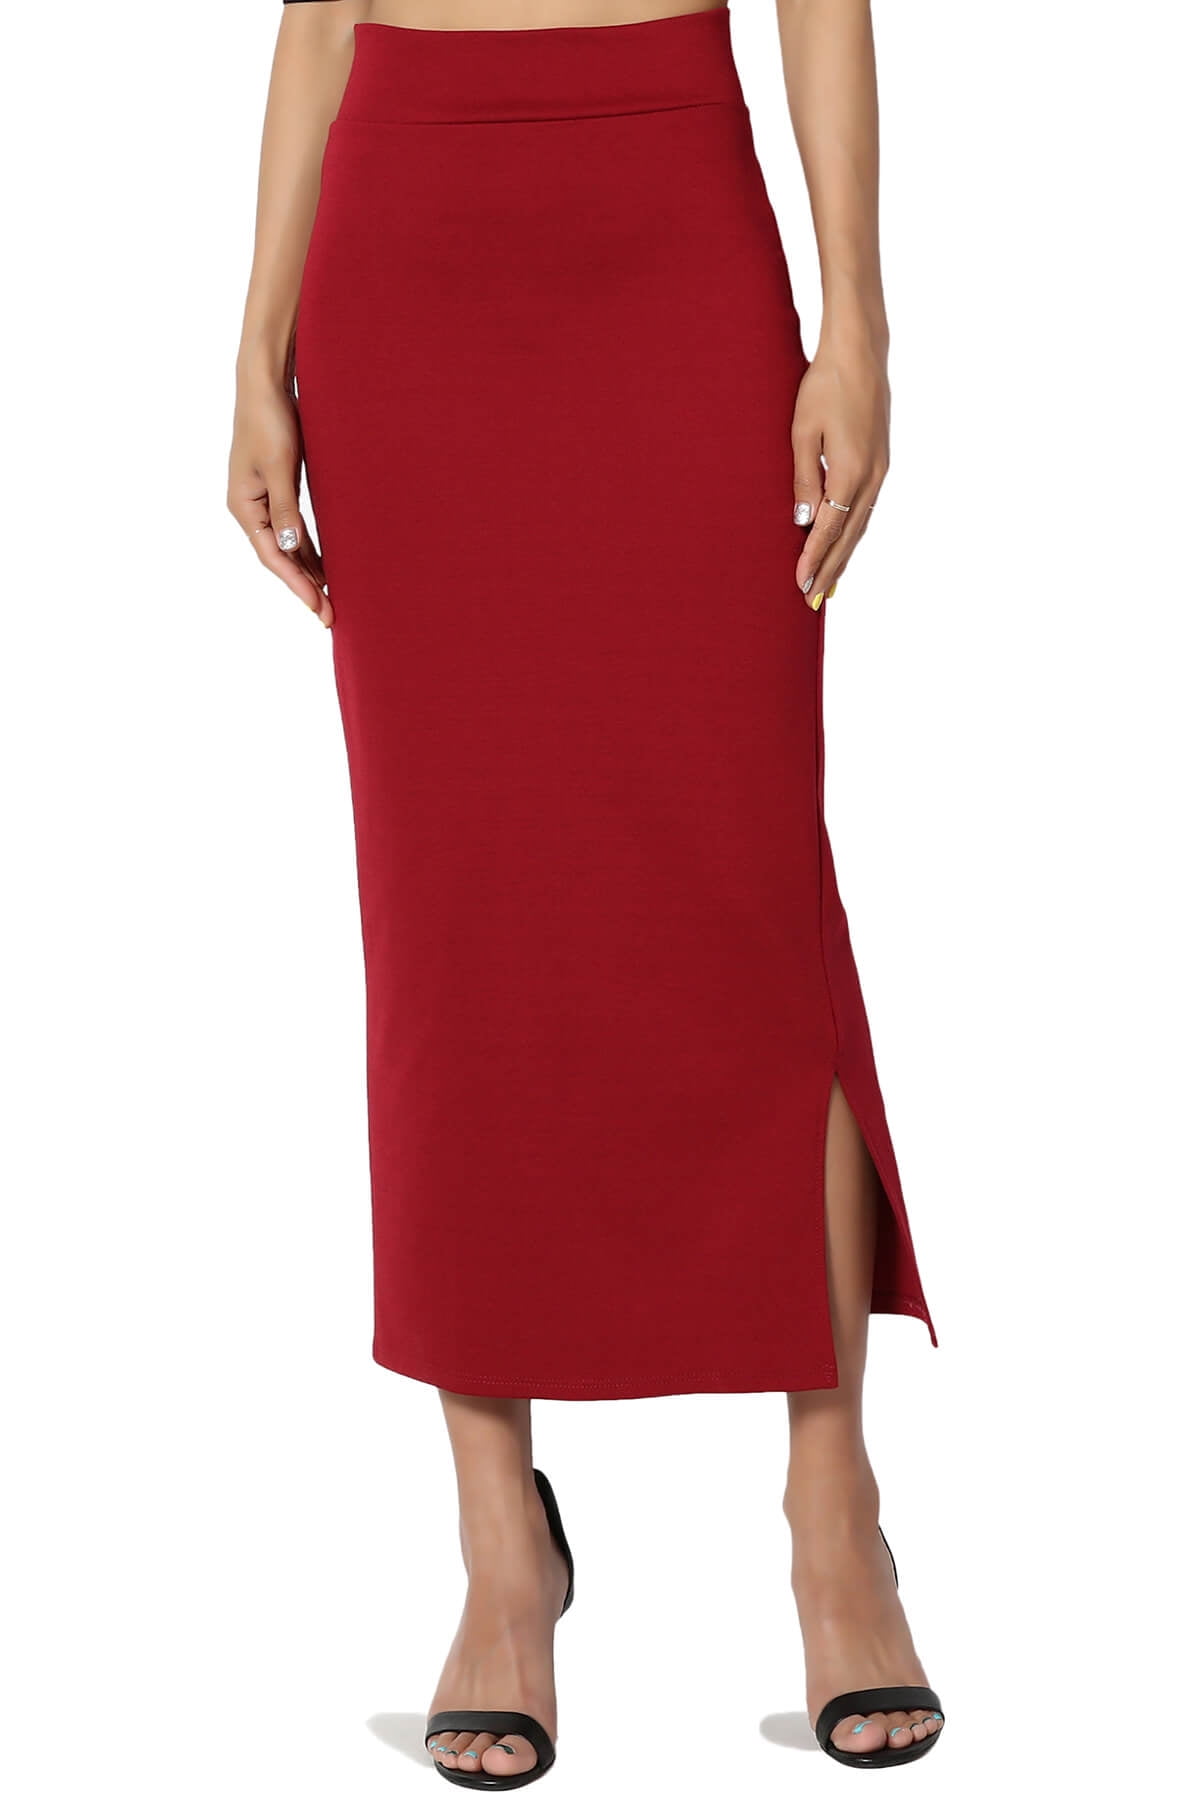 Women Fashion Long Maxi Skirt Pencil Floor Length Skirt Solid Color High Waisted Casual Skirt by Lowprofile 